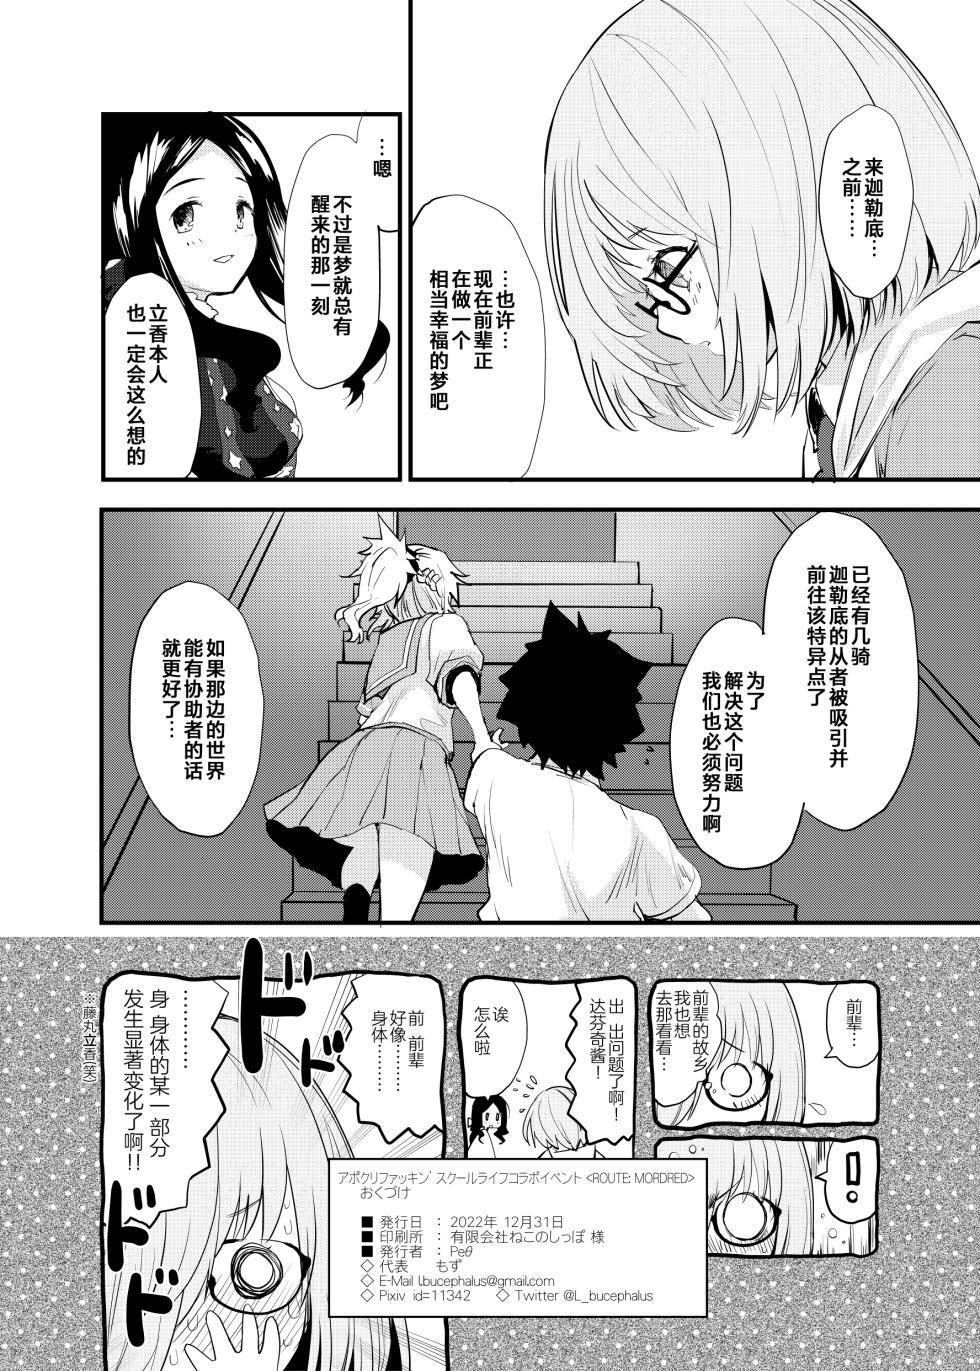 [Peθ (Mozu)] ApocryFucking' School Life Collabo Event <ROUTE: MORDRED> | ApocryFucking' 校园生佸合作活动 <ROUTE: MORDRED> (Fate/Grand Order) [Chinese] [Digital] - Page 26